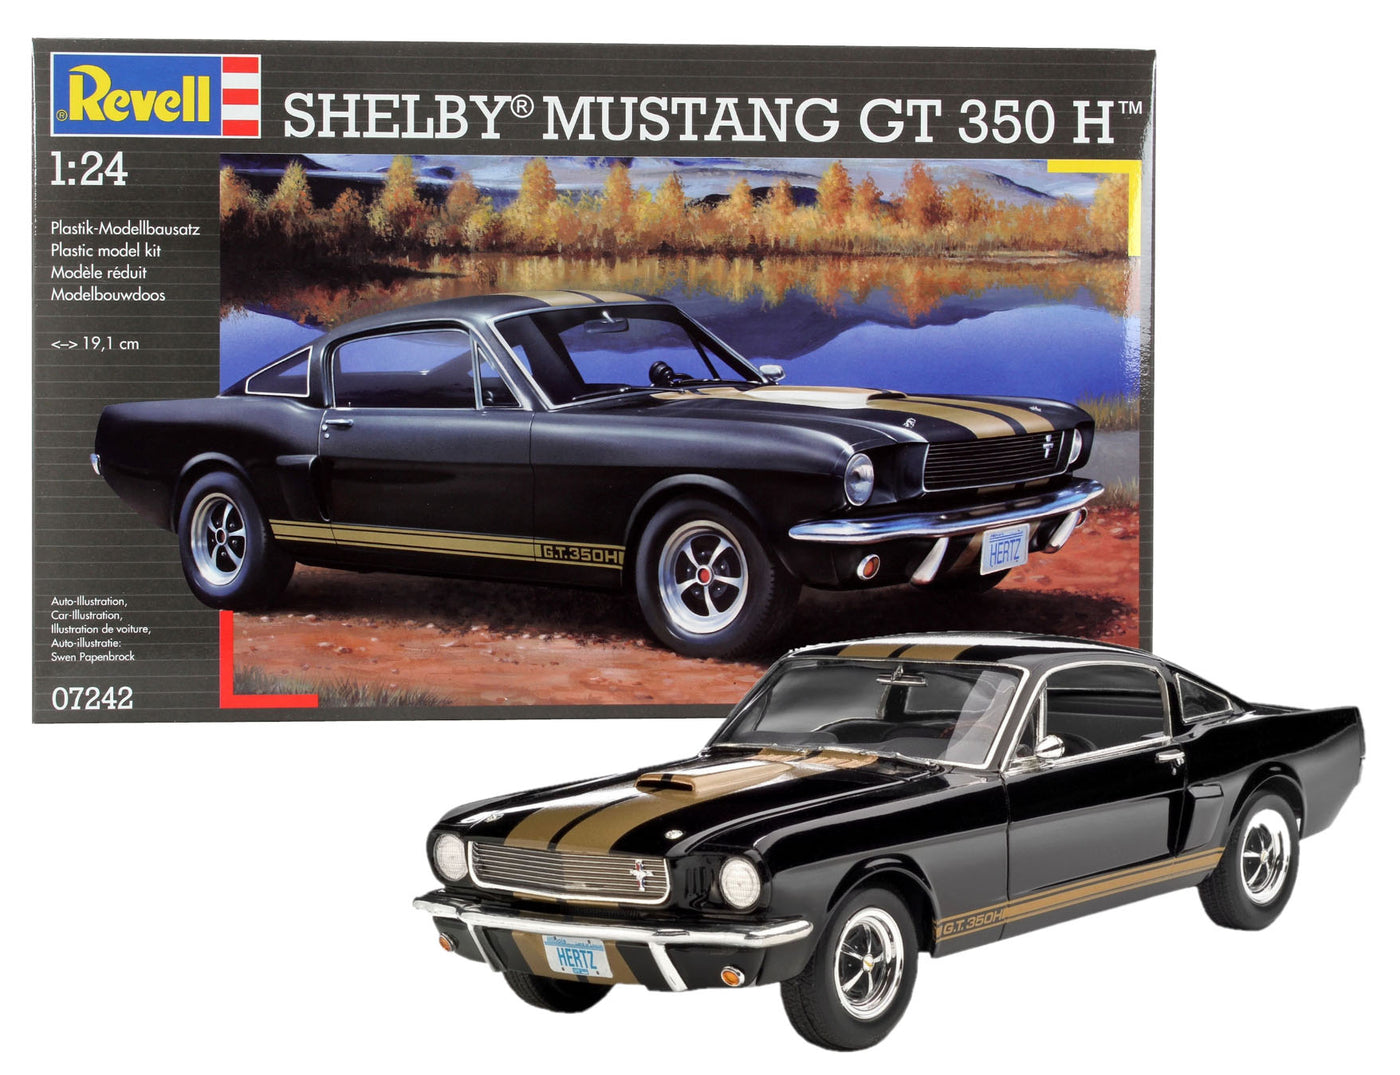 1/24 Shelby Mustang GT 350 H